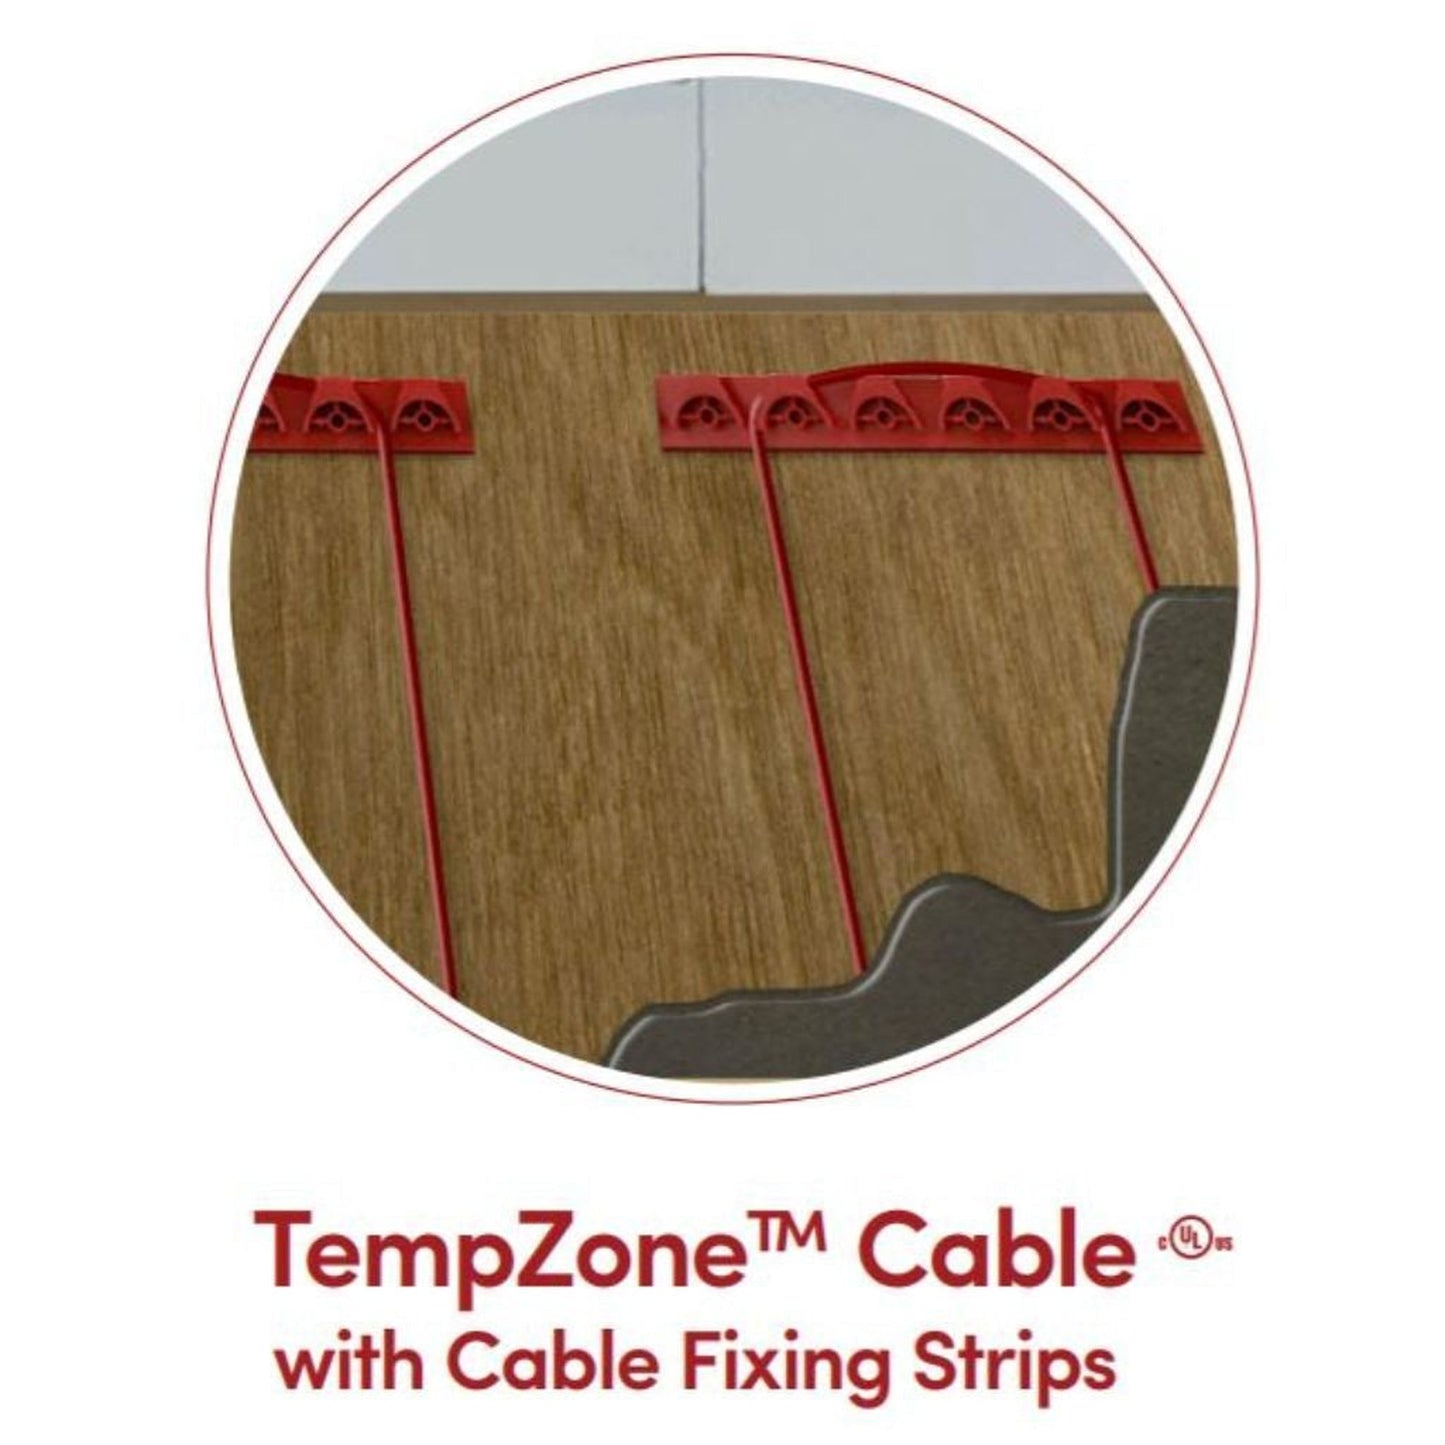 WarmlyYours TempZone Cable 70′ 120V Radiant Floor Heating Cable System Kit With nSpire Touch Programmable Touchscreen Thermostat